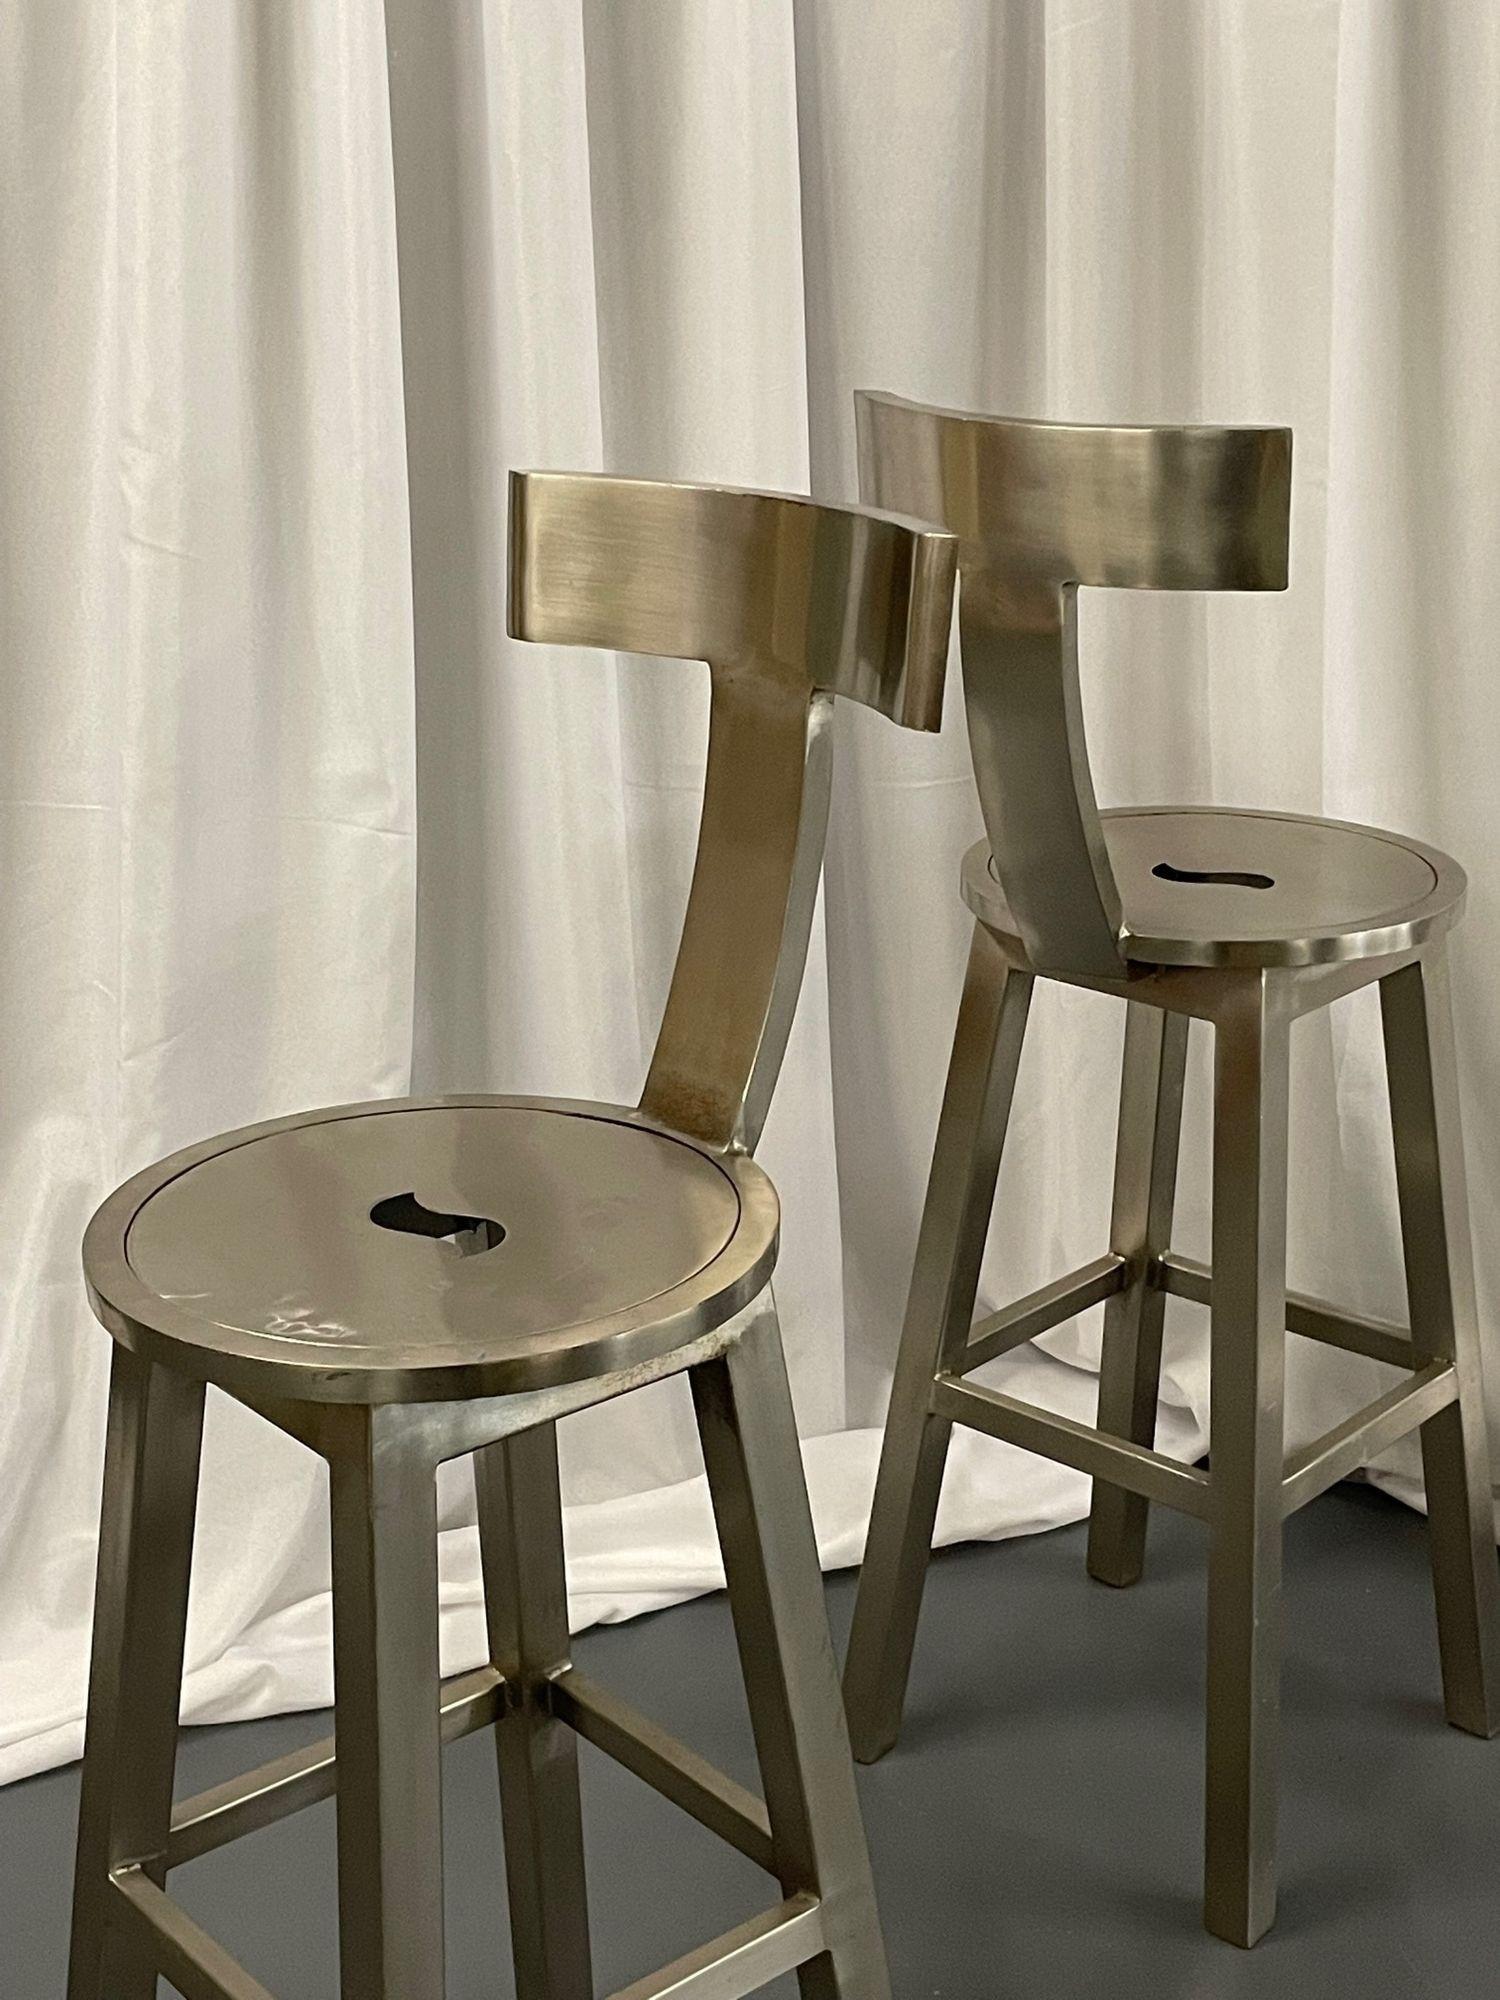 Pair of Modern industrial style steel bar / counter stools, organic form
 
Two (2) Industrial steel bar stools, high stools, or counter stools by an unknown American designer. 
 
Other American designers of the period include Adrian Pearsall,